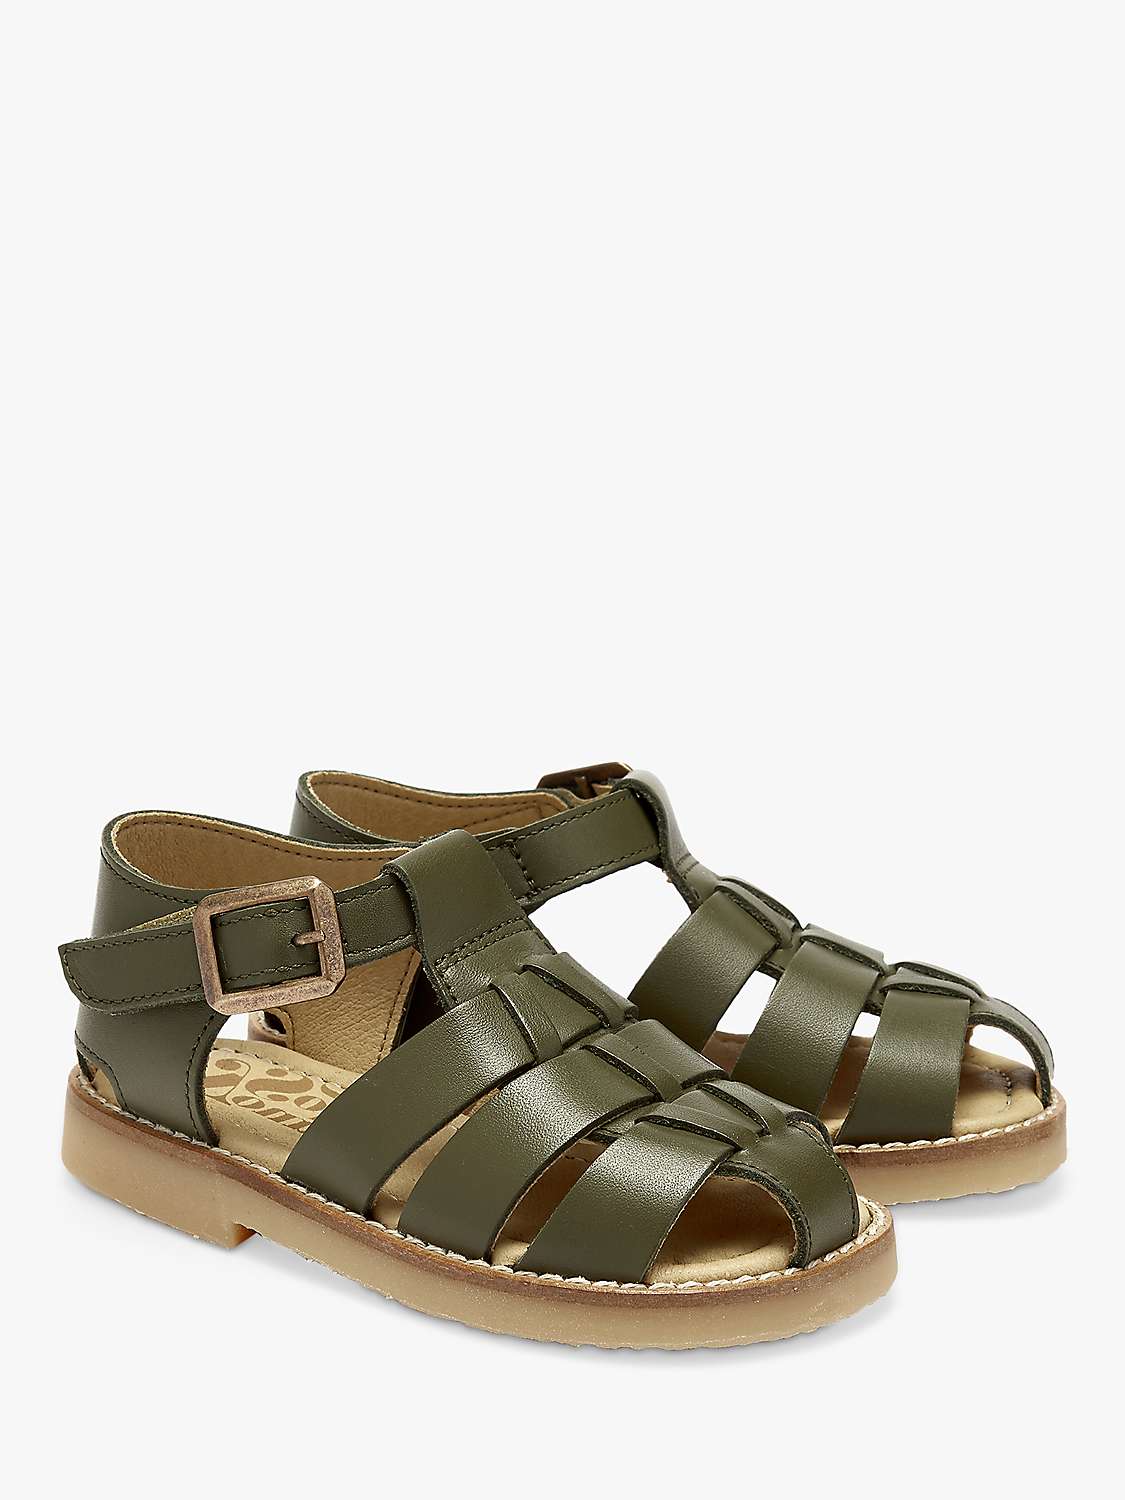 Buy Young Soles Kids' Leather Noah Fisherman Sandals Online at johnlewis.com